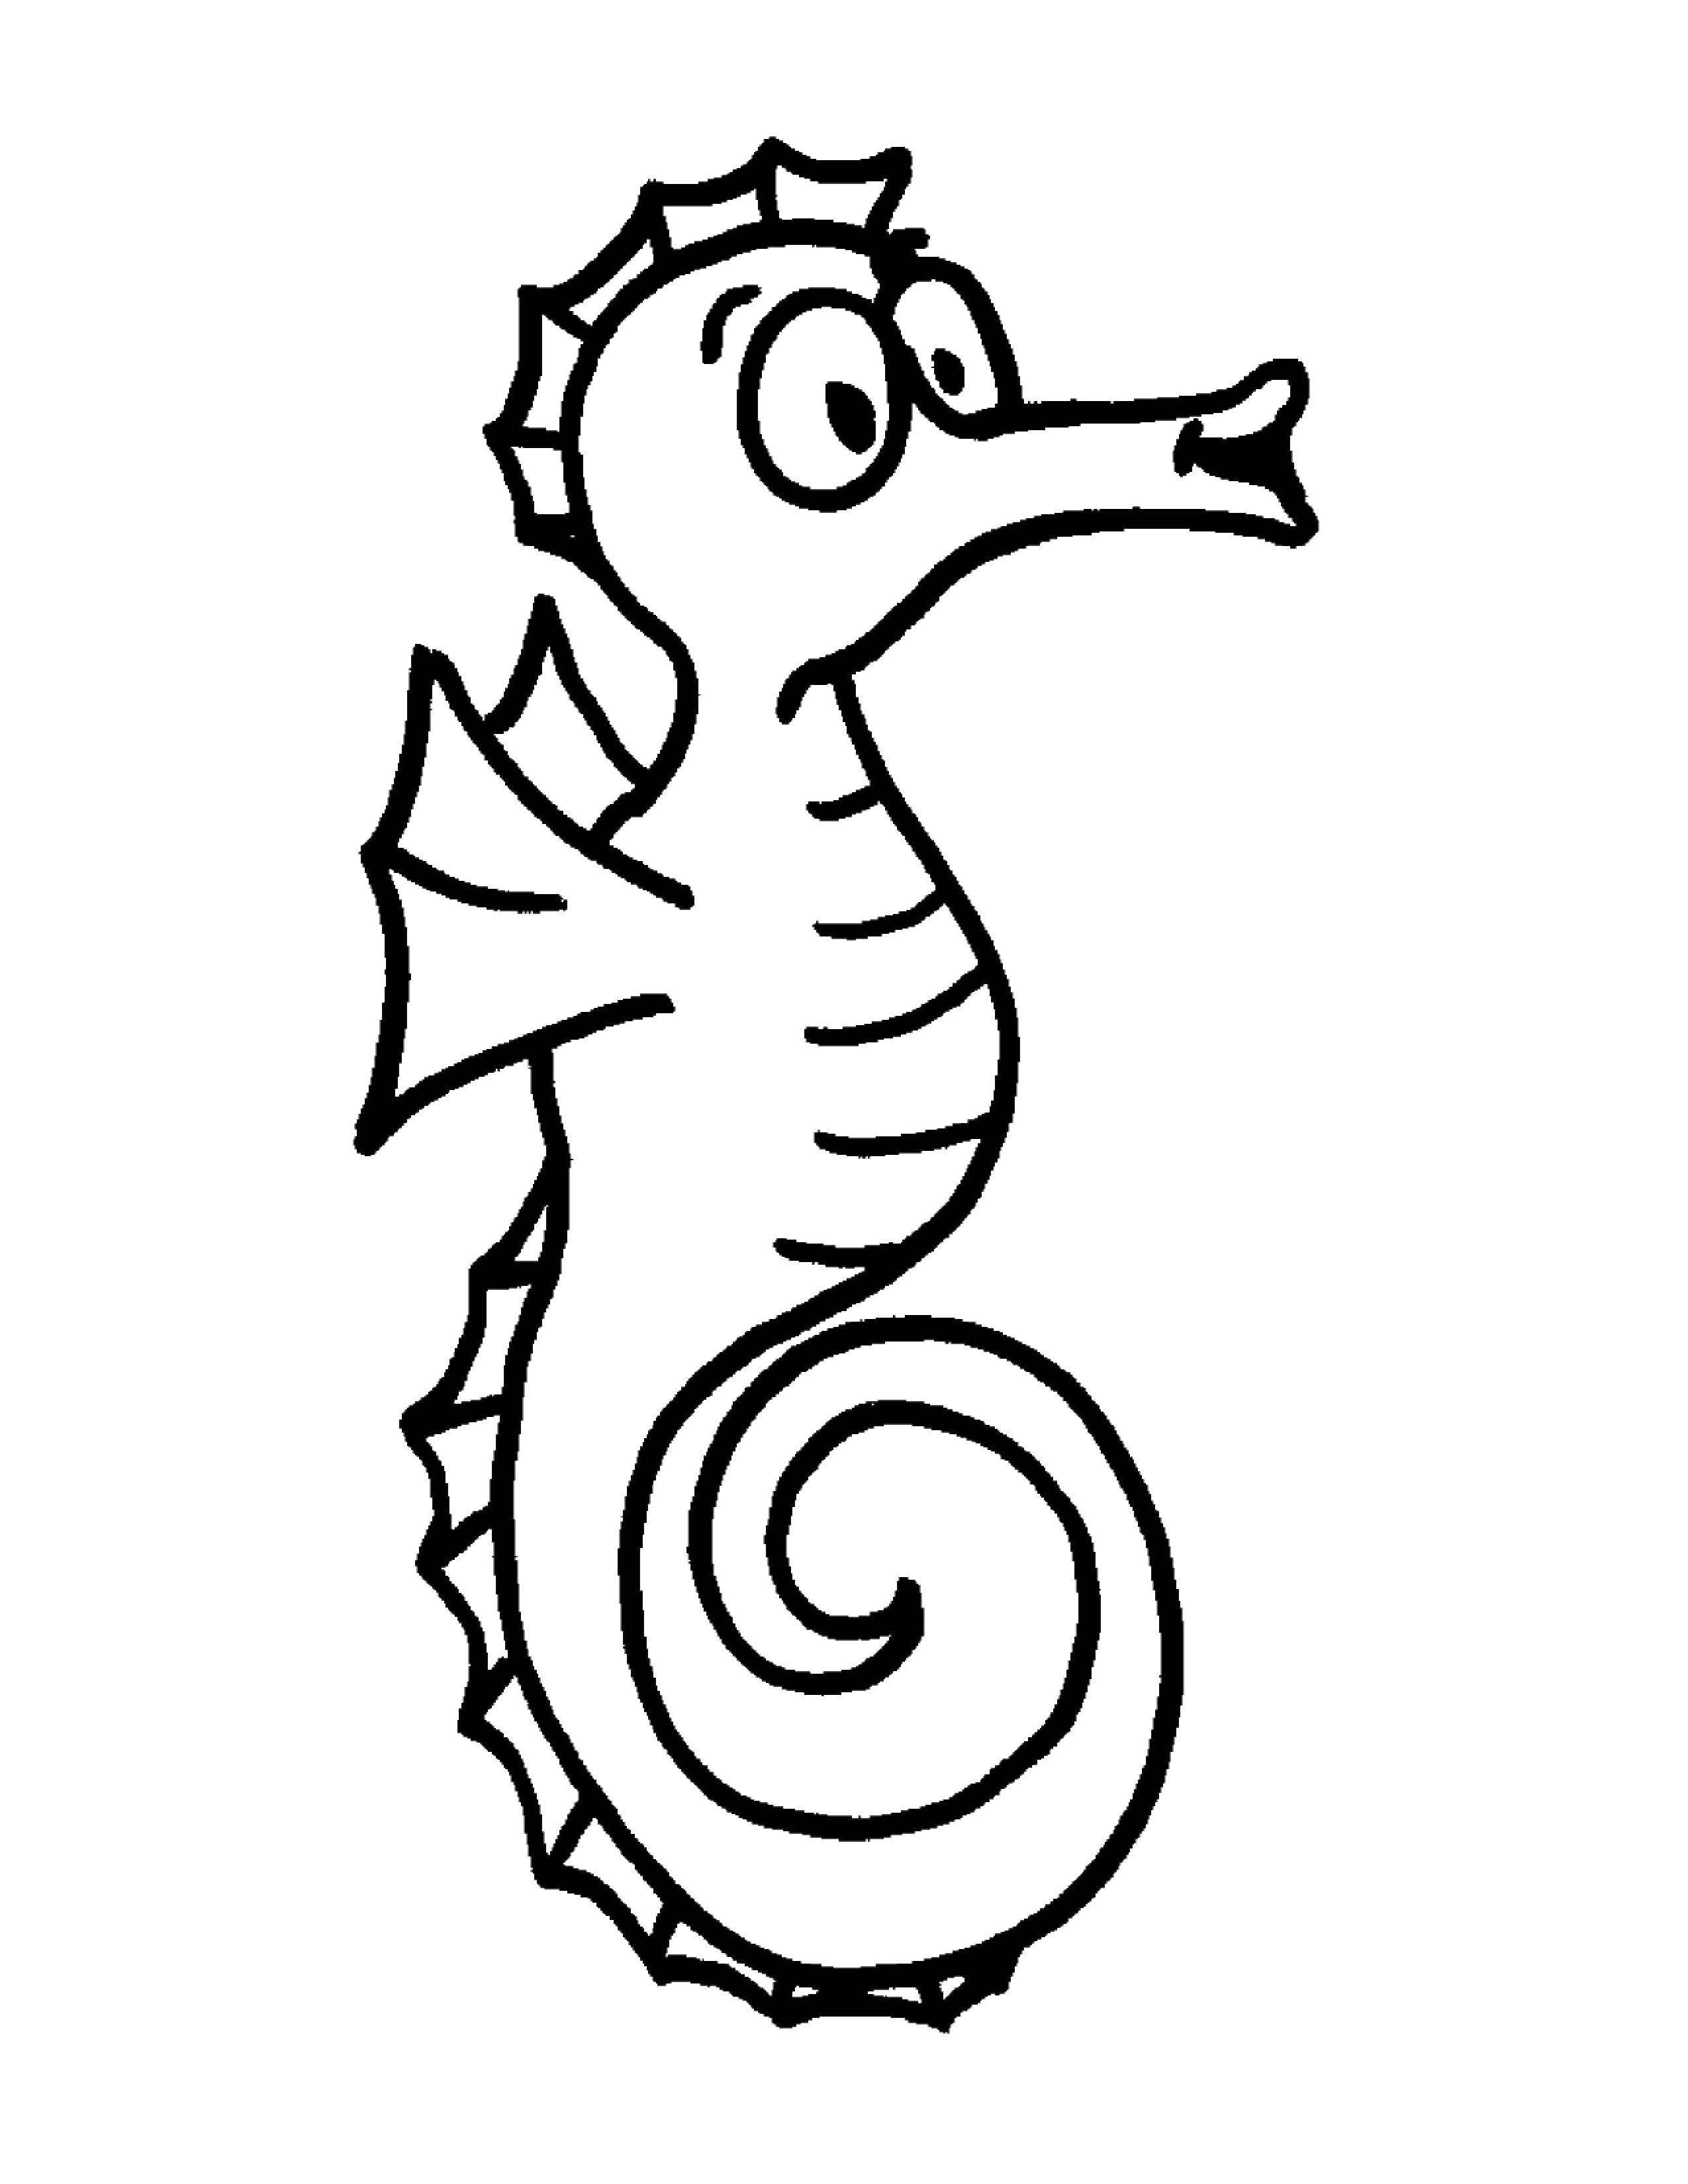 Coloring Seahorse. Category marine. Tags:  Underwater world, seahorses.